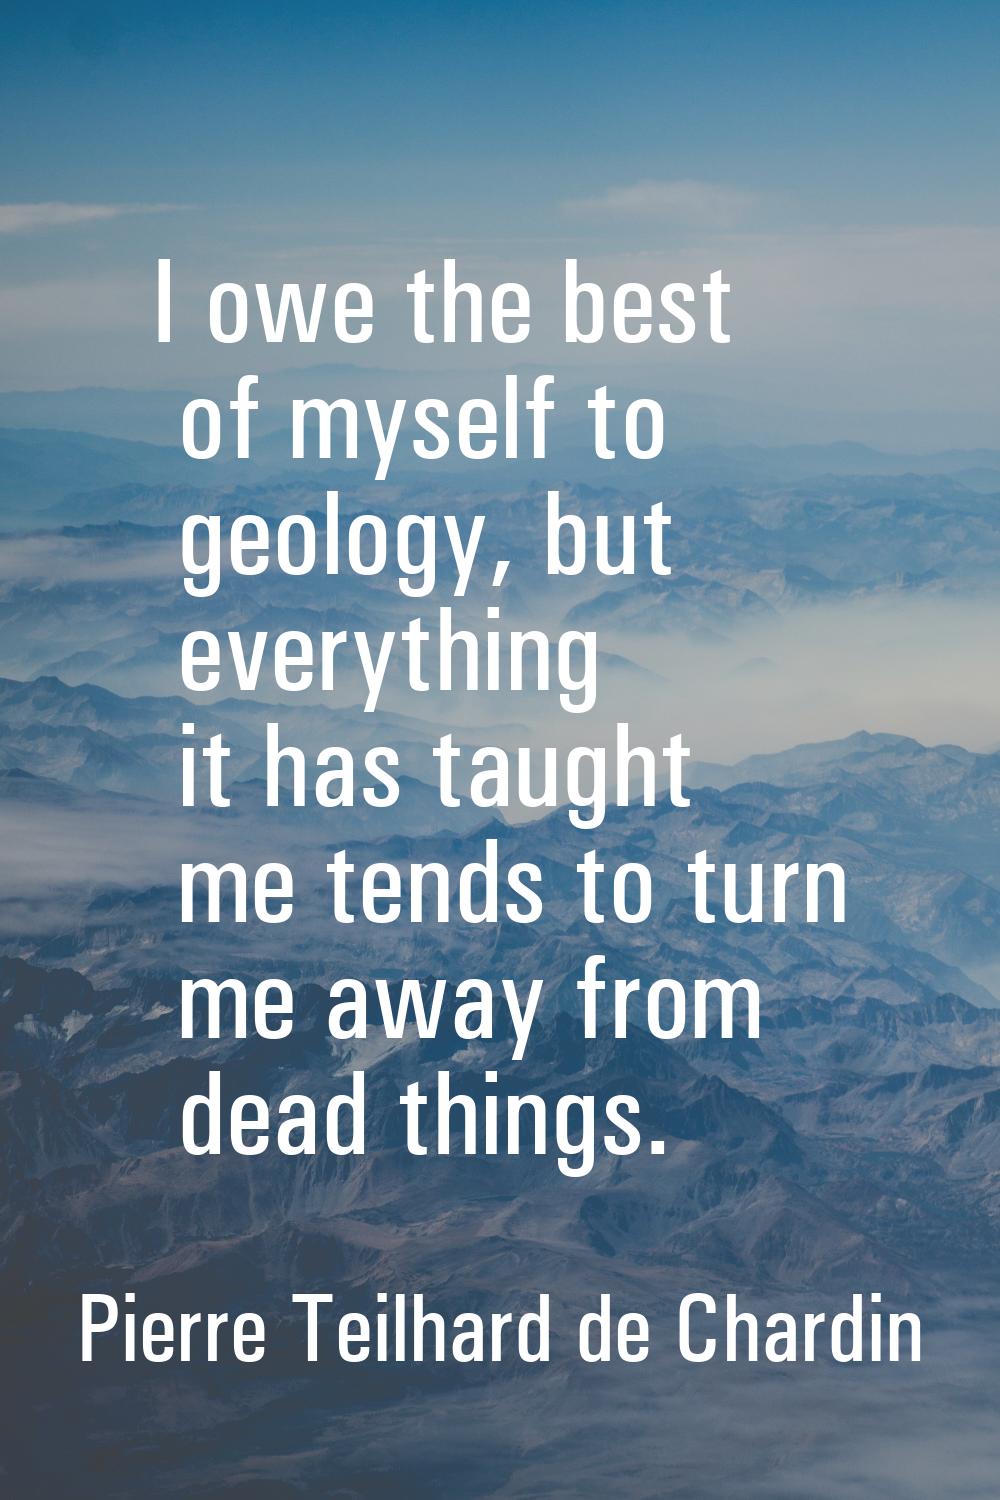 I owe the best of myself to geology, but everything it has taught me tends to turn me away from dea